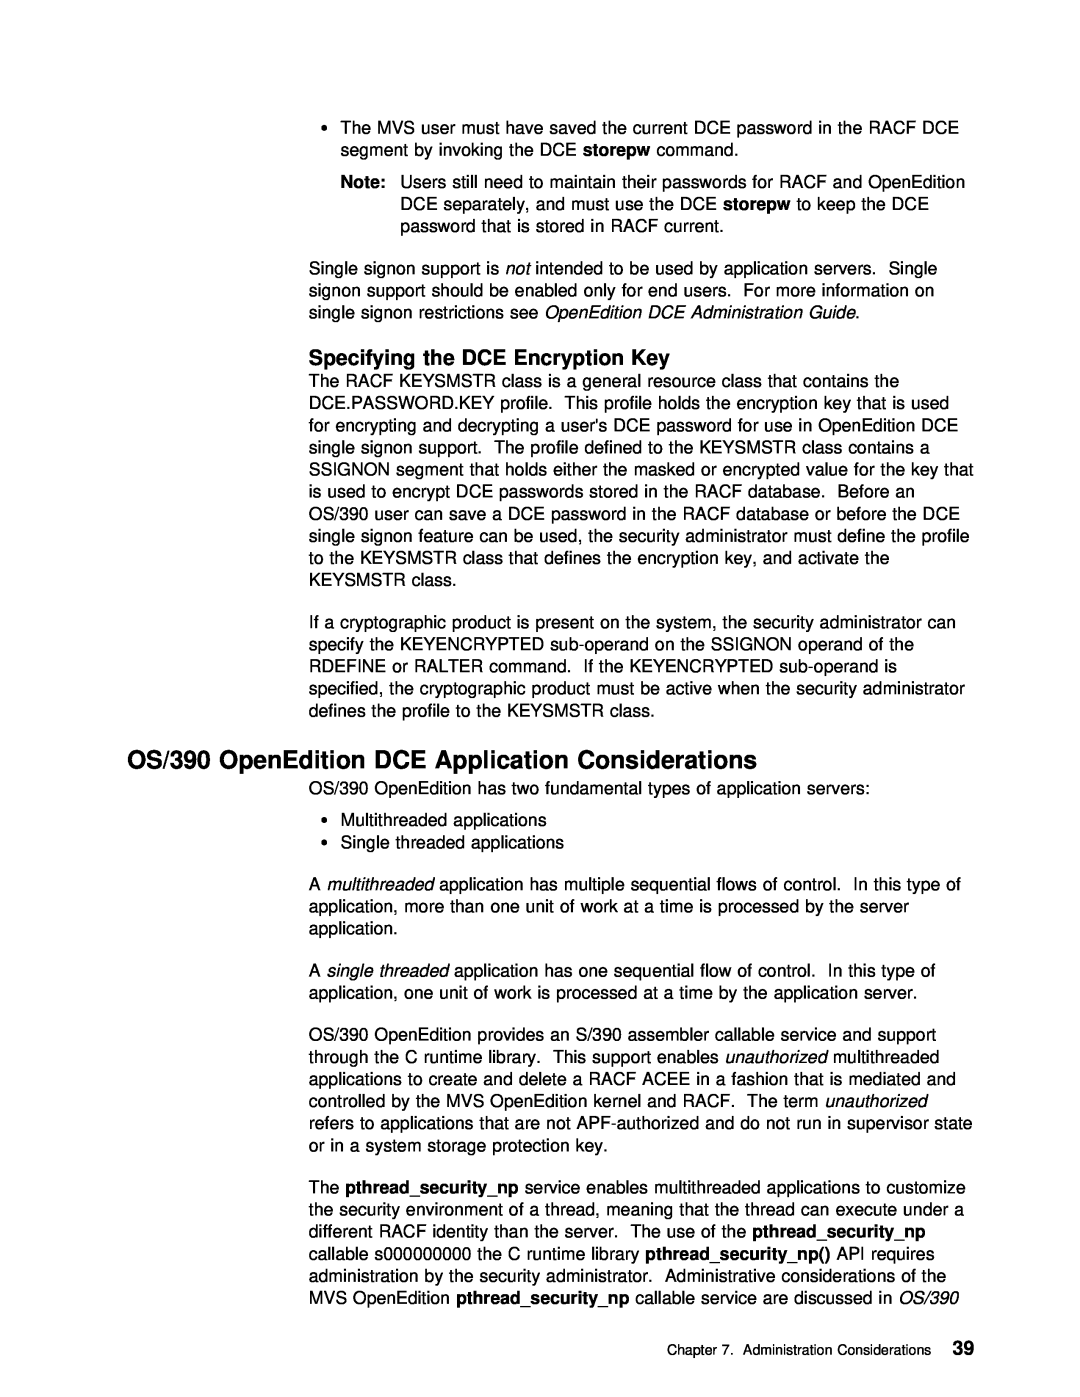 IBM GC28-1920-01 manual OS/390 OpenEdition DCE Application Considerations, the DCE Encryption Key 